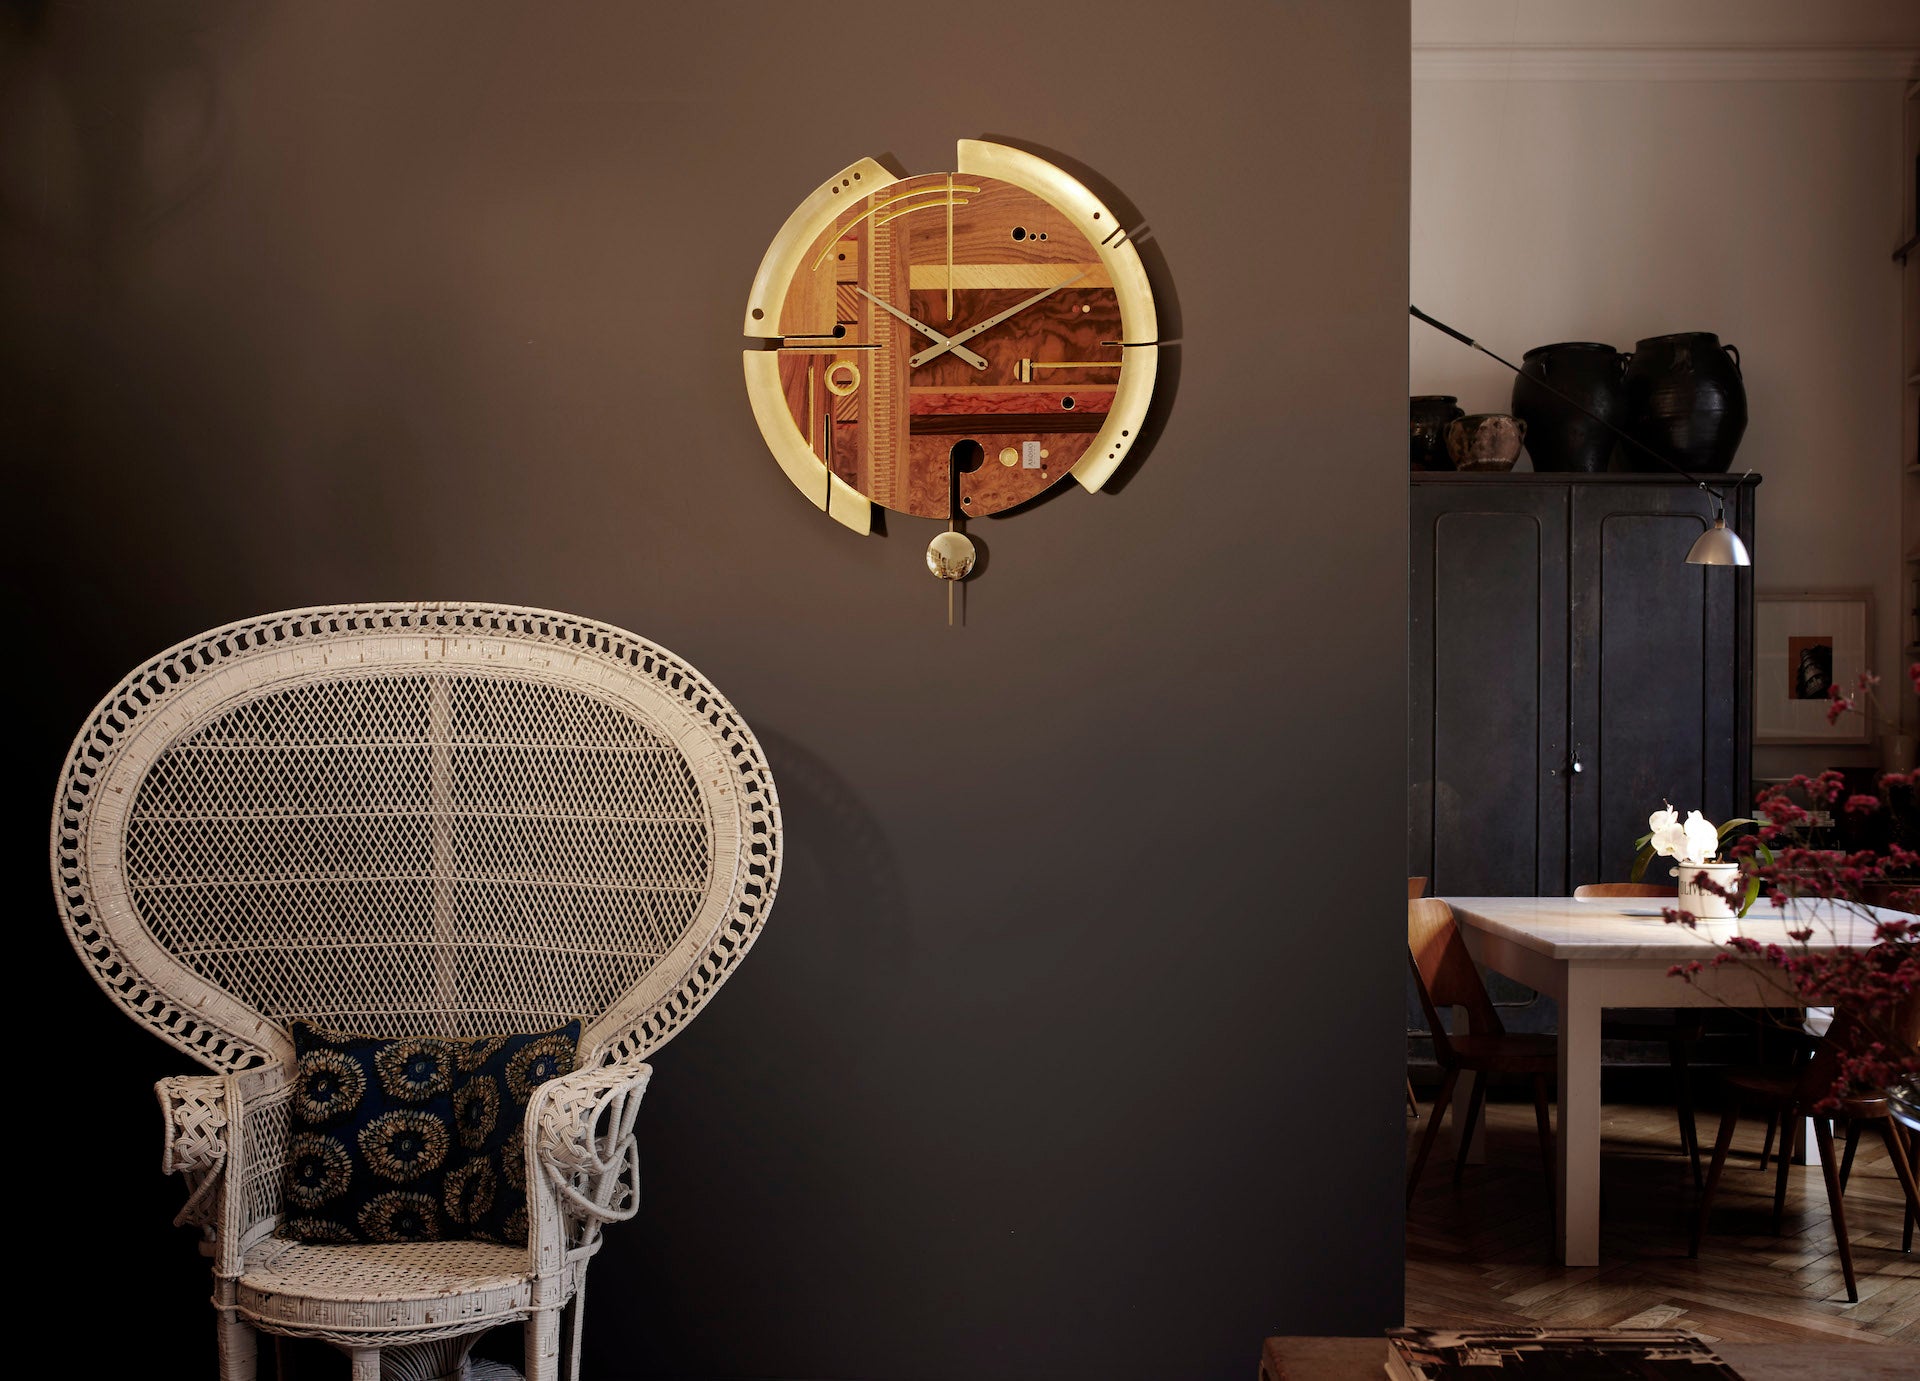 A good idea to enrich your wall - Gold wall clock - expensive clock design - Design Wall Clock by Arosio Milano